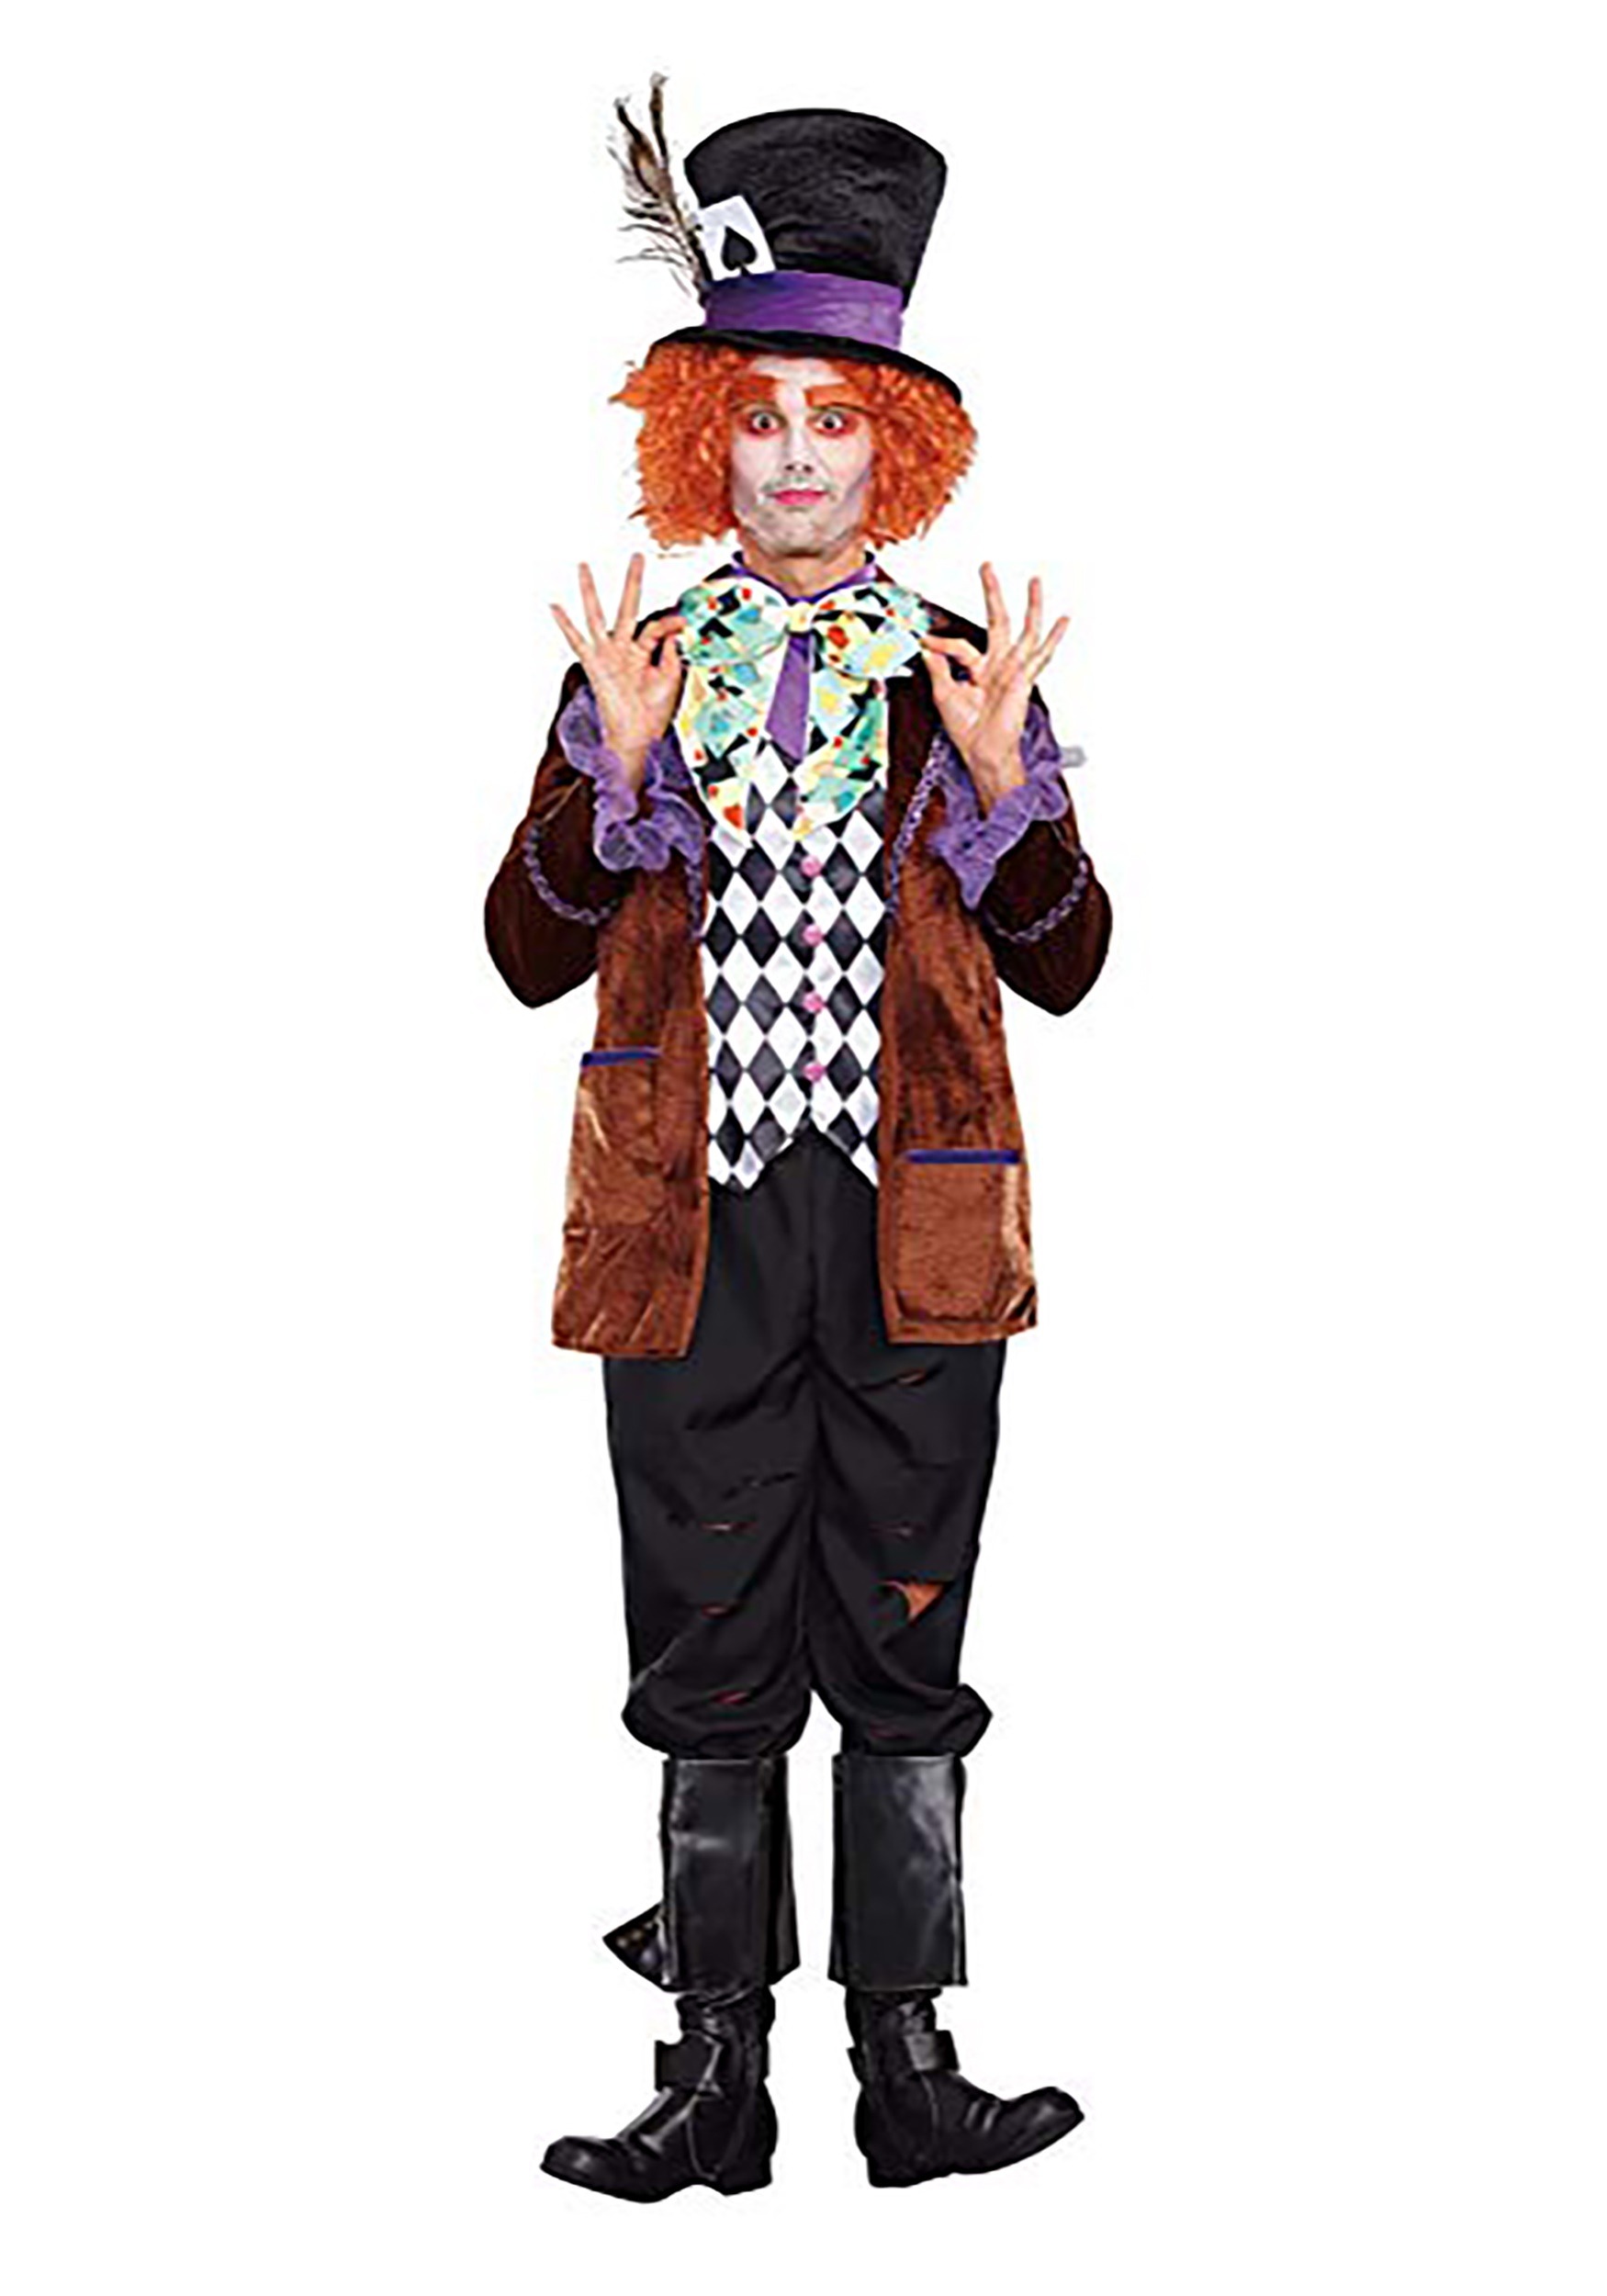 Image of Hatter Madness Costume for Men ID DR10297-L